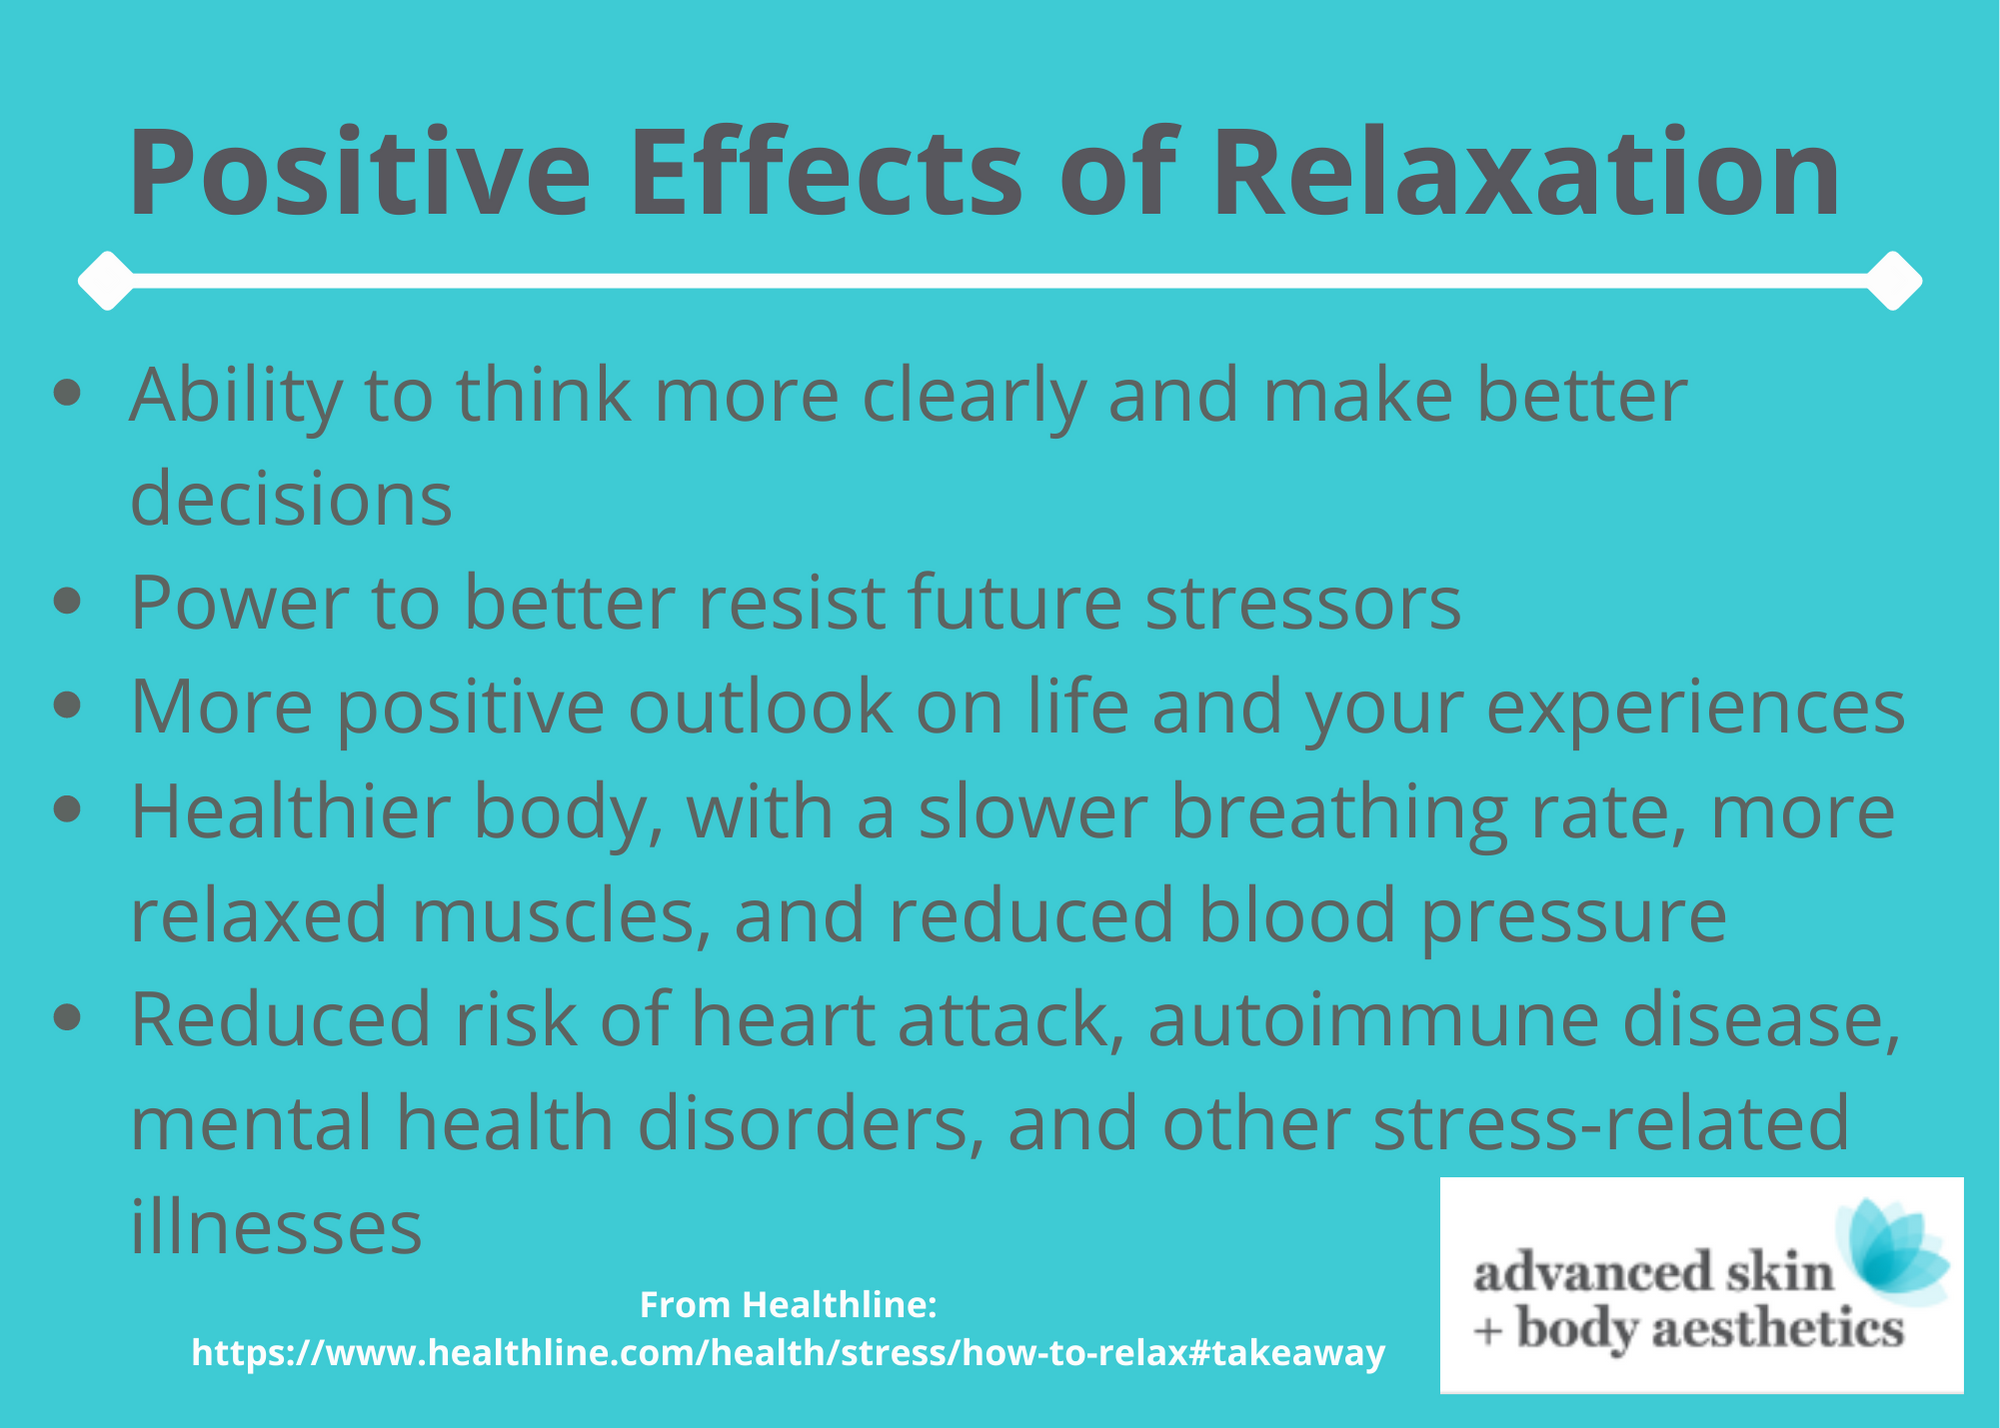 Infographic explaining the positive effects of relaxation by Lincoln-based Advanced Skin + Body Aesthetics Spa